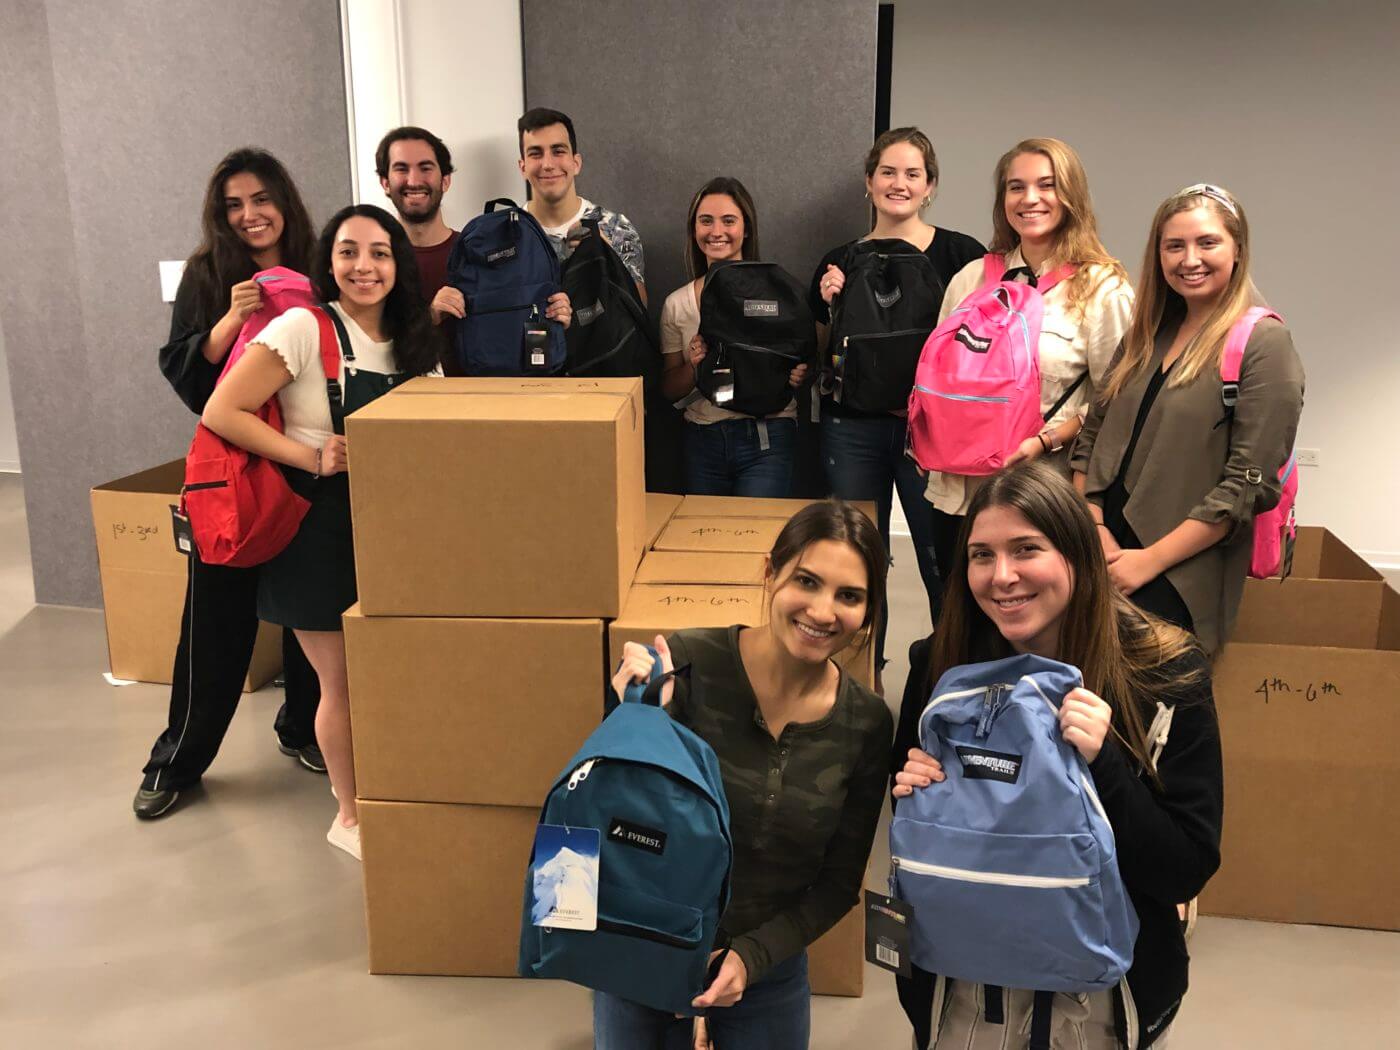 men and women smiling with backpacks and cardboard boxes